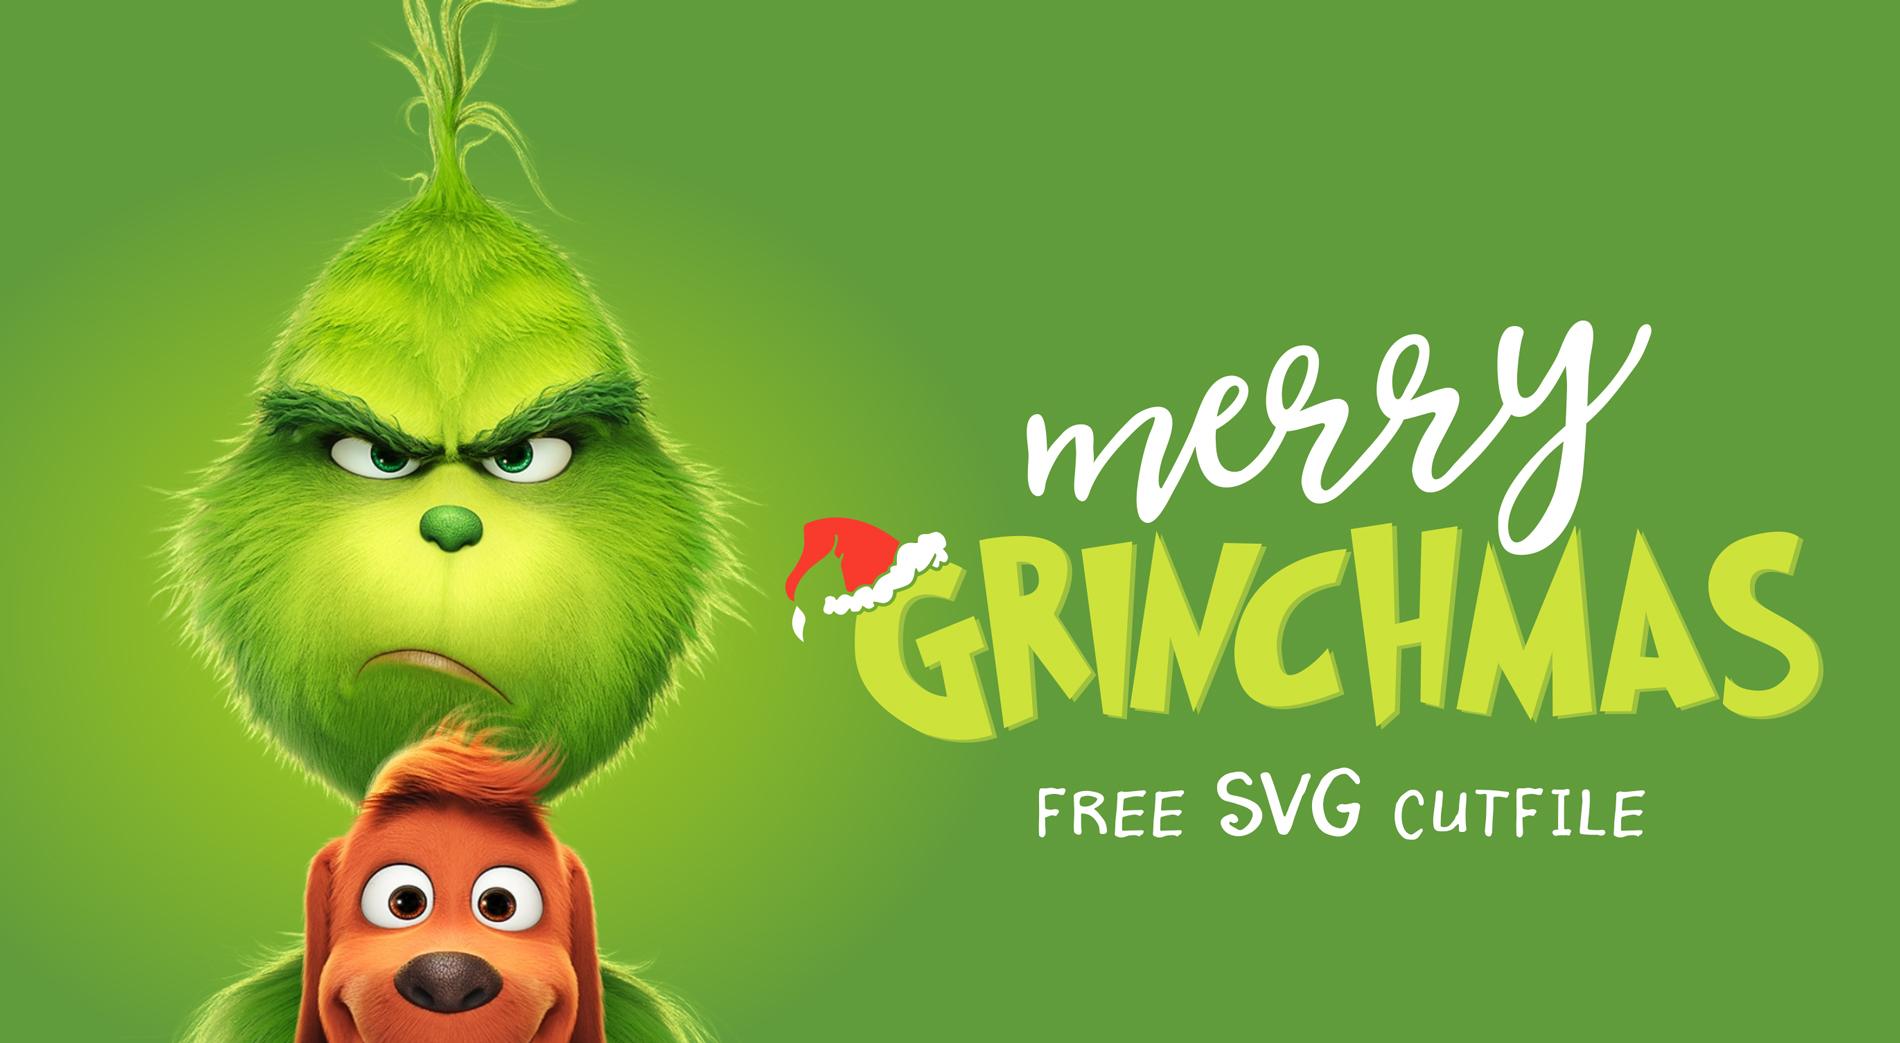 merry-grinchmas-featured-SVG - Awesome with Sprinkles.